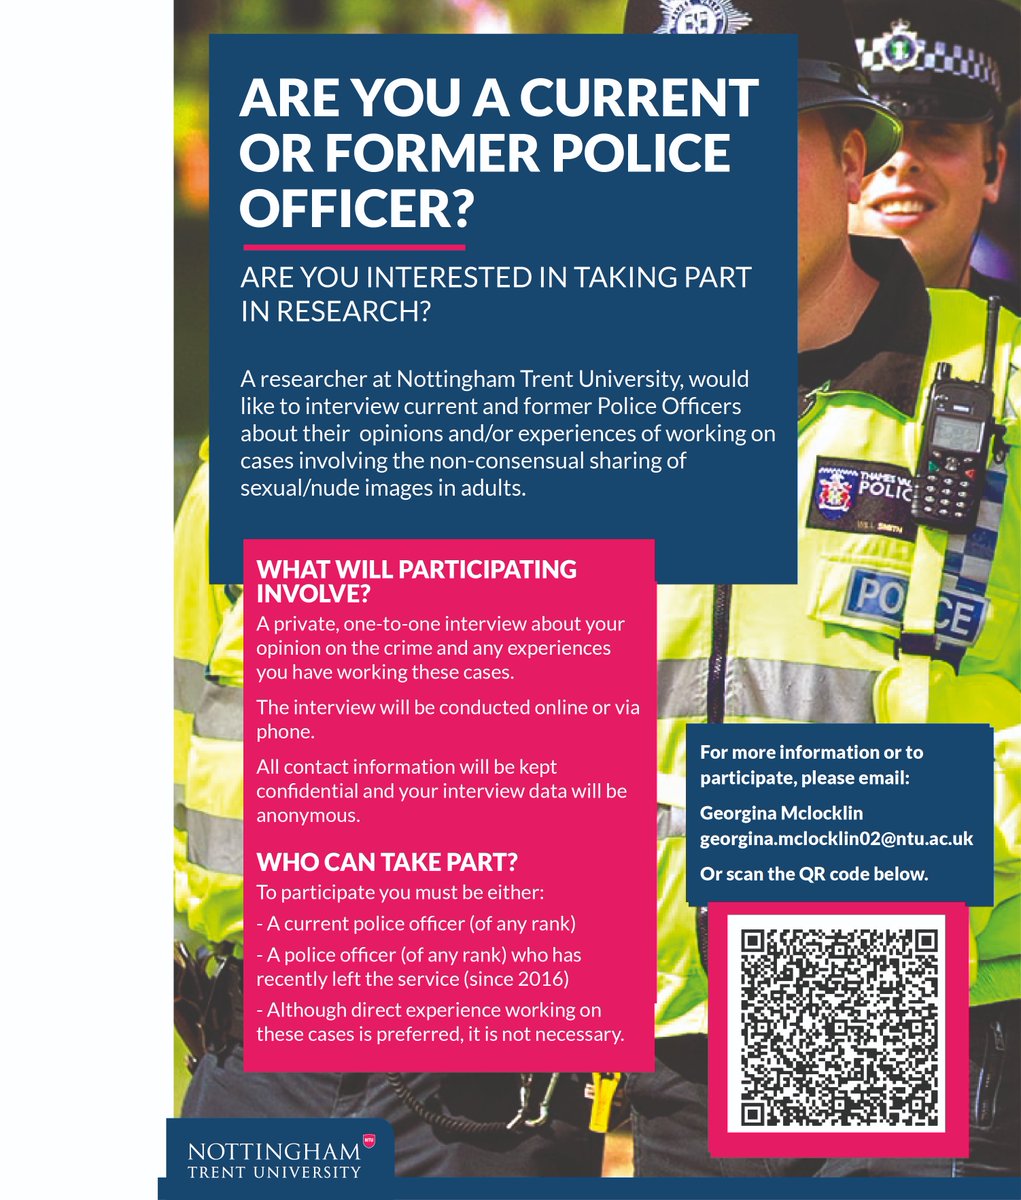 Please RT. Looking for #policeofficers to take part in an online interview about their experiences of working on cases involving the nonconsensual sharing of sexual/nude images in adults #ukpolicing #ukpolice #ThinBlueLine See poster.